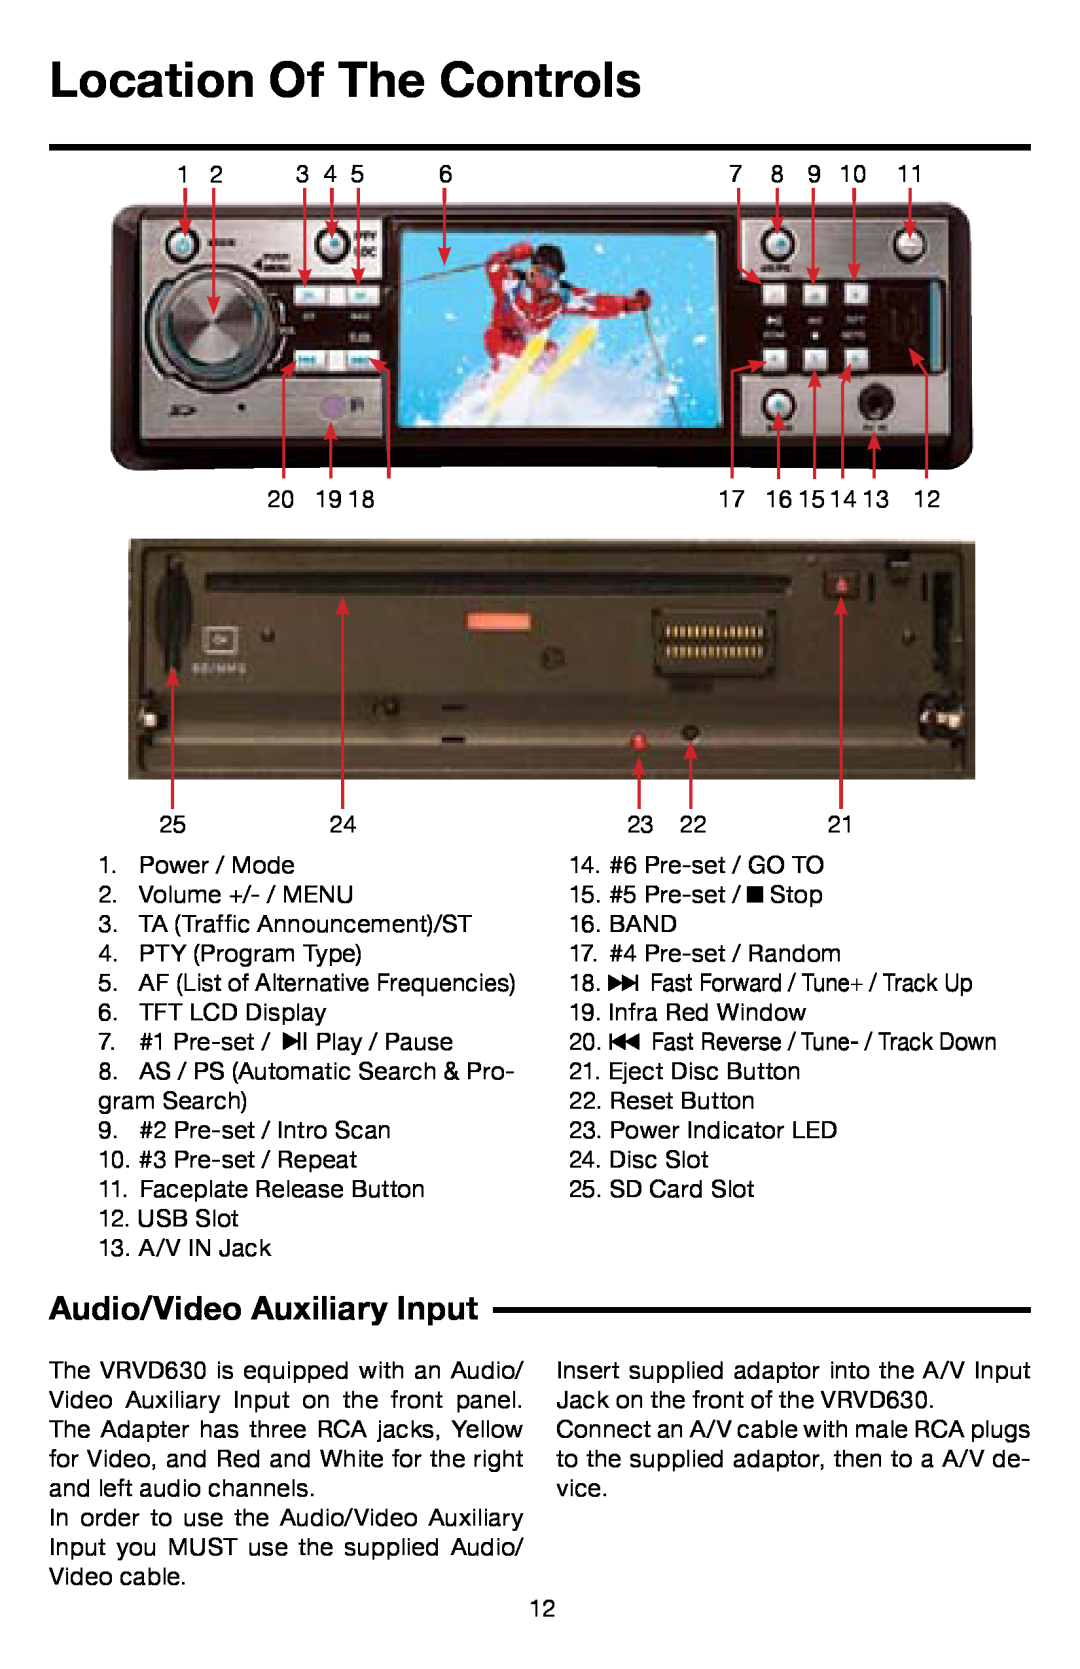 Roadmaster VRVD630 manual Location Of The Controls, Audio/Video Auxiliary Input 